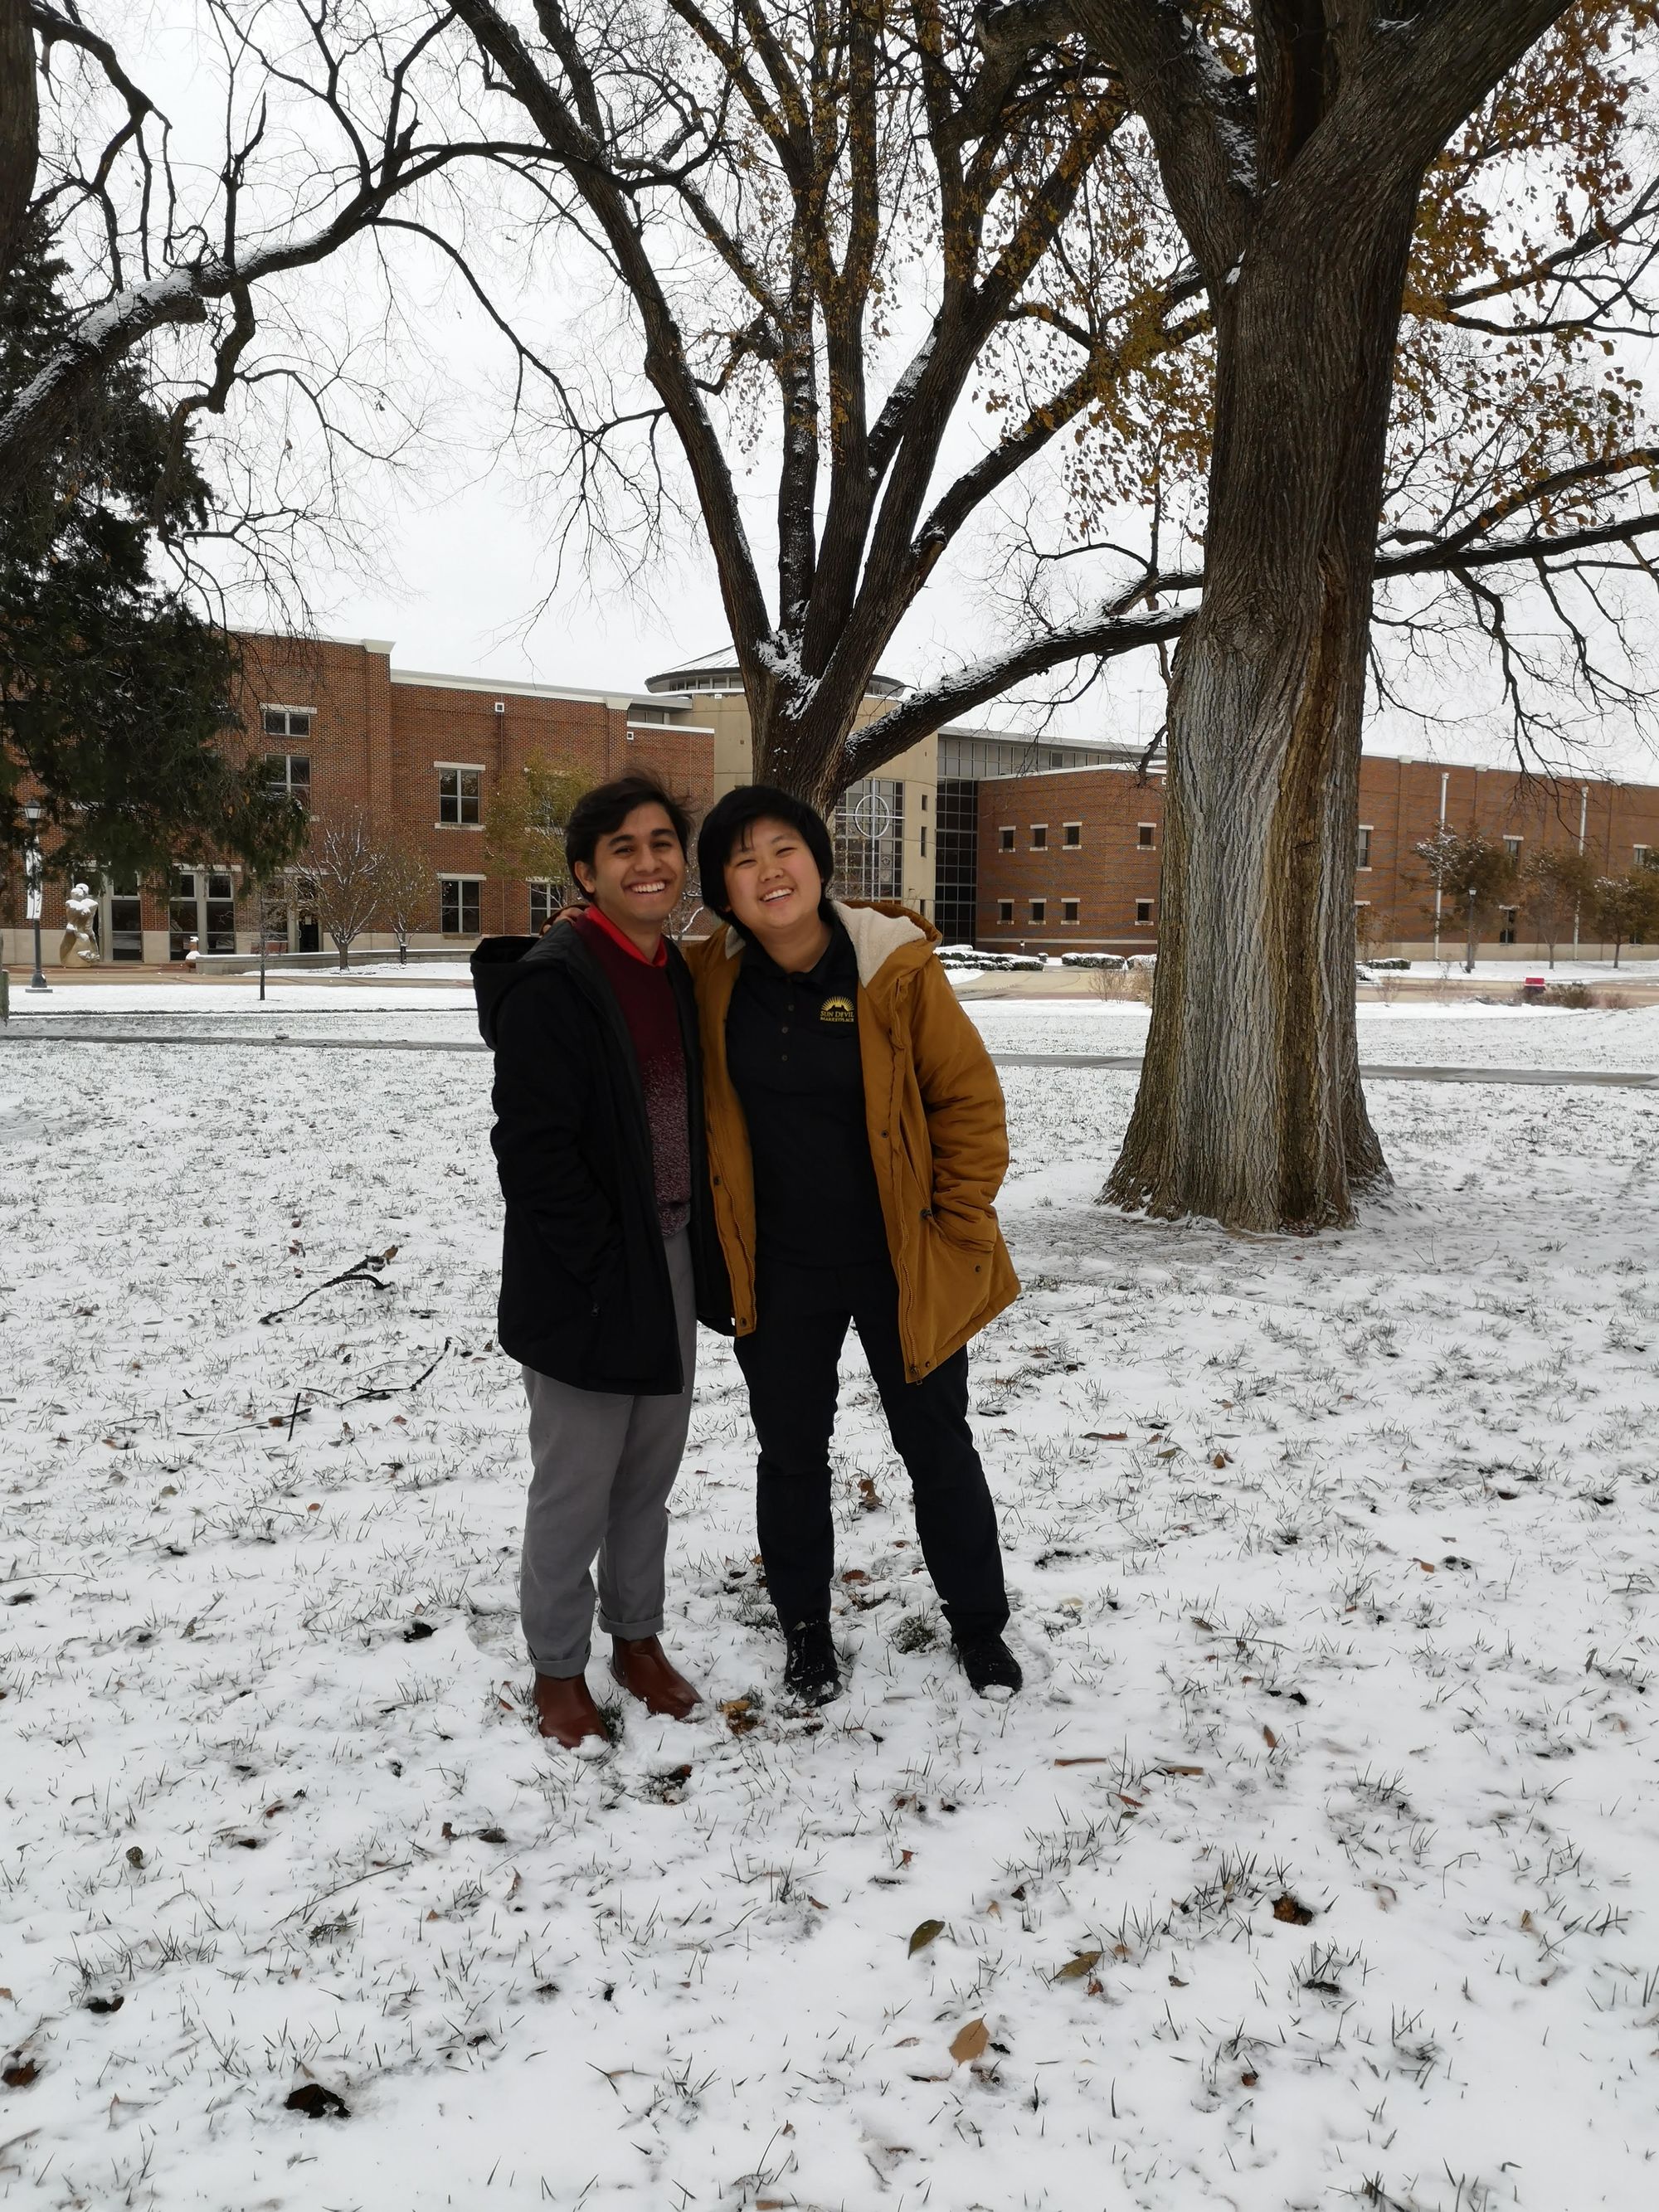 MYSTERIOUS WHITE STUFF: Newman students experience their first snow